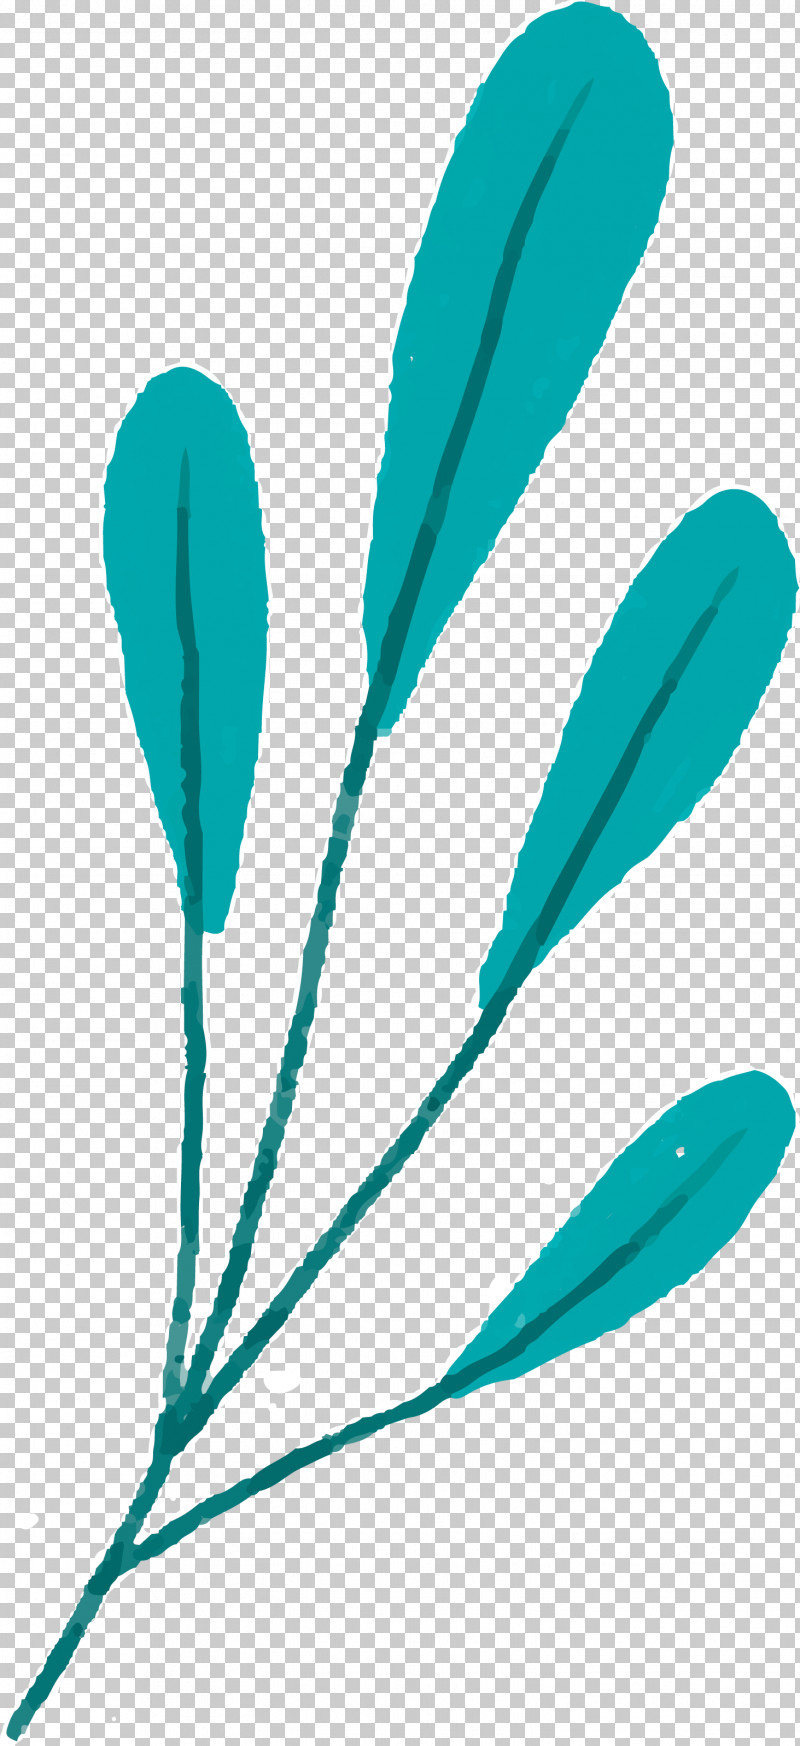 Leaf Plant Stem Line Quill Microsoft Azure PNG, Clipart, Biology, Leaf, Line, Microsoft Azure, Plants Free PNG Download